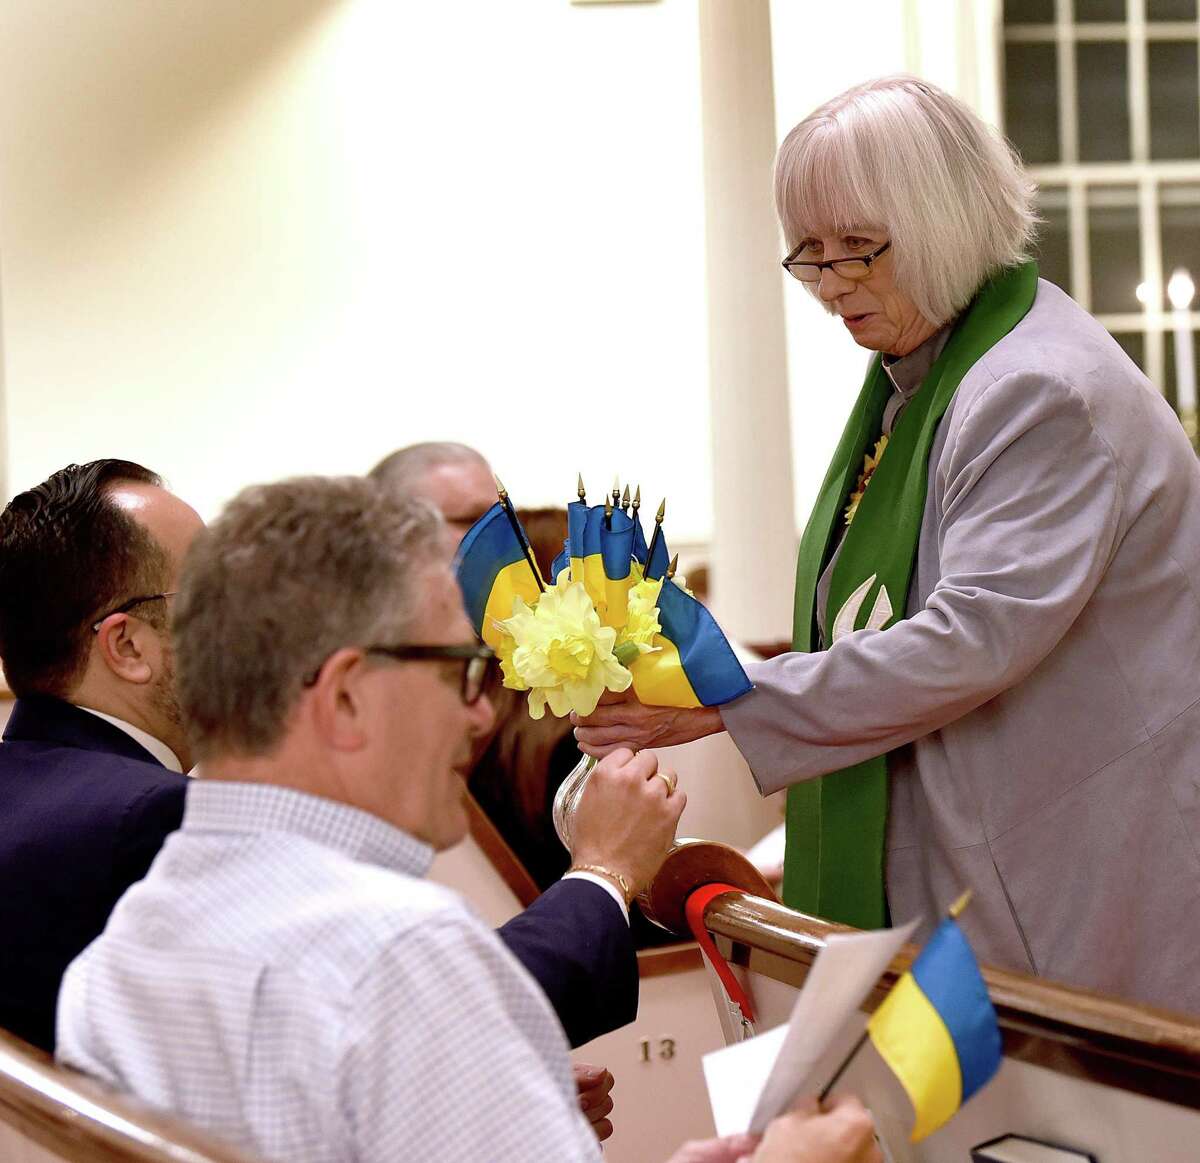 The Rev. Pat Kriss, Pastor of First Congregational Church in Danbury, passes out flowers and a small Ukrainian flag at the start of a peace vigil for Ukraine and the world Monday evening, March 7, 2022.